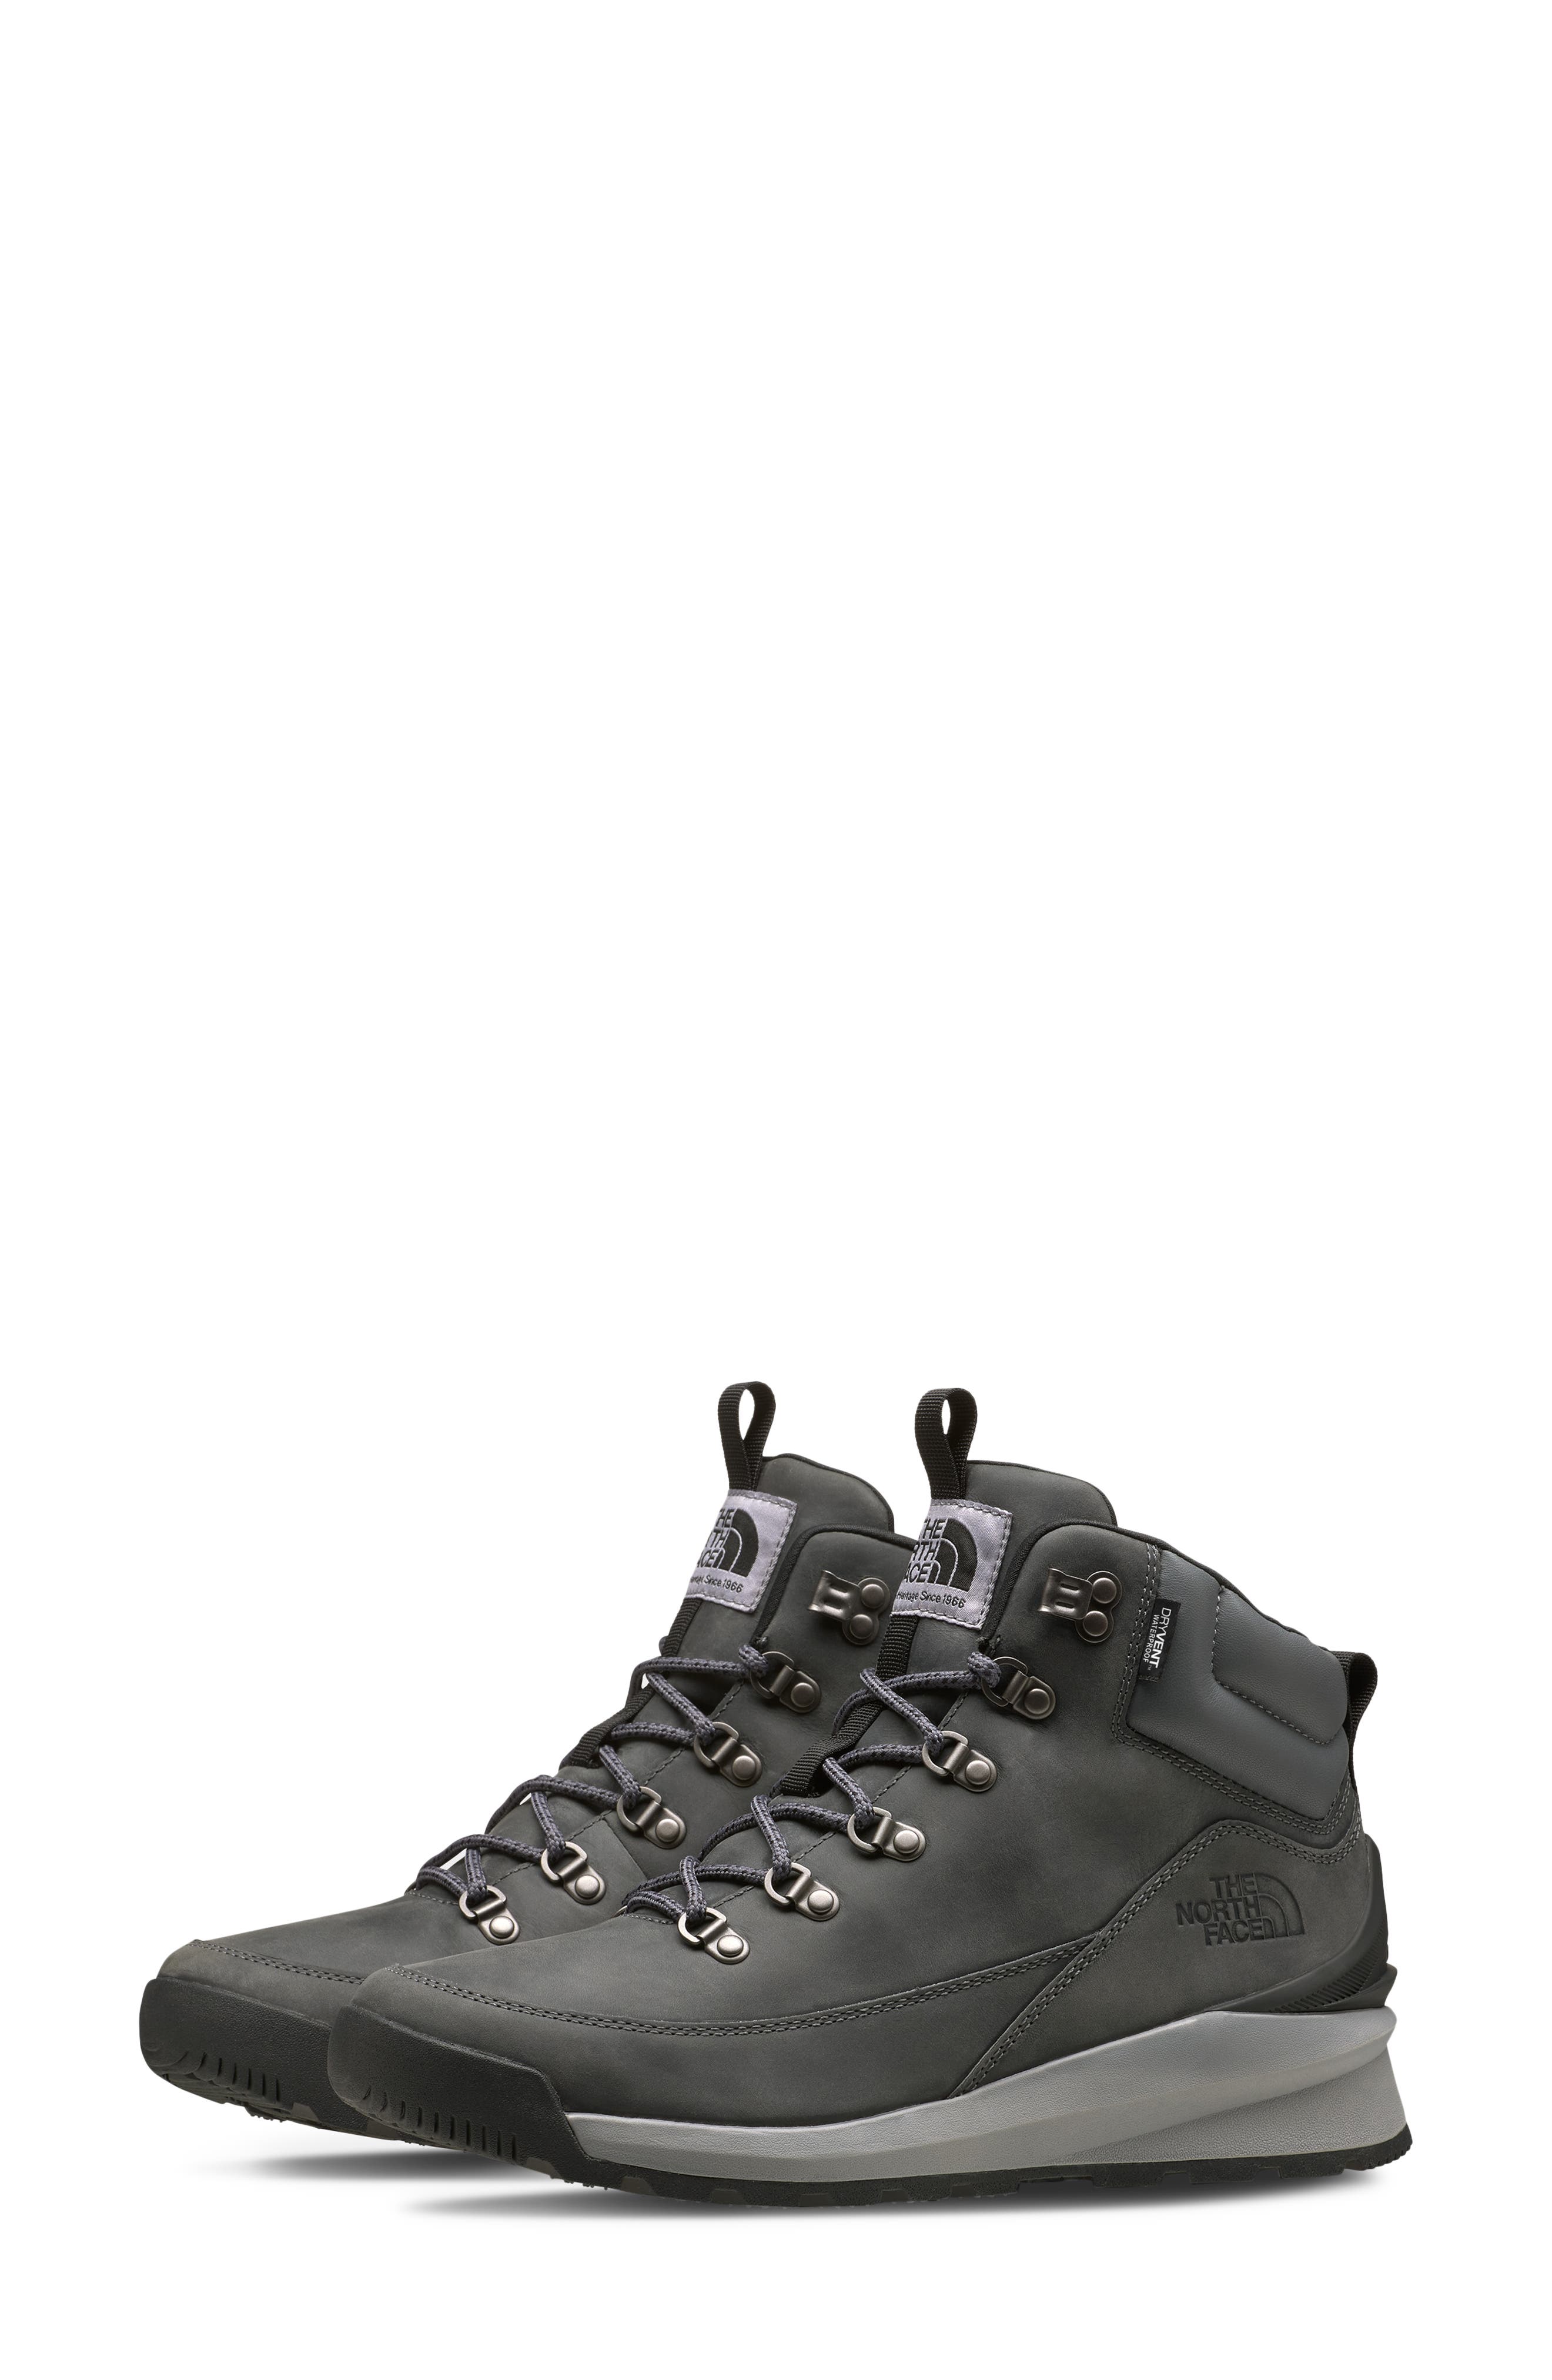 north face black hiking boots